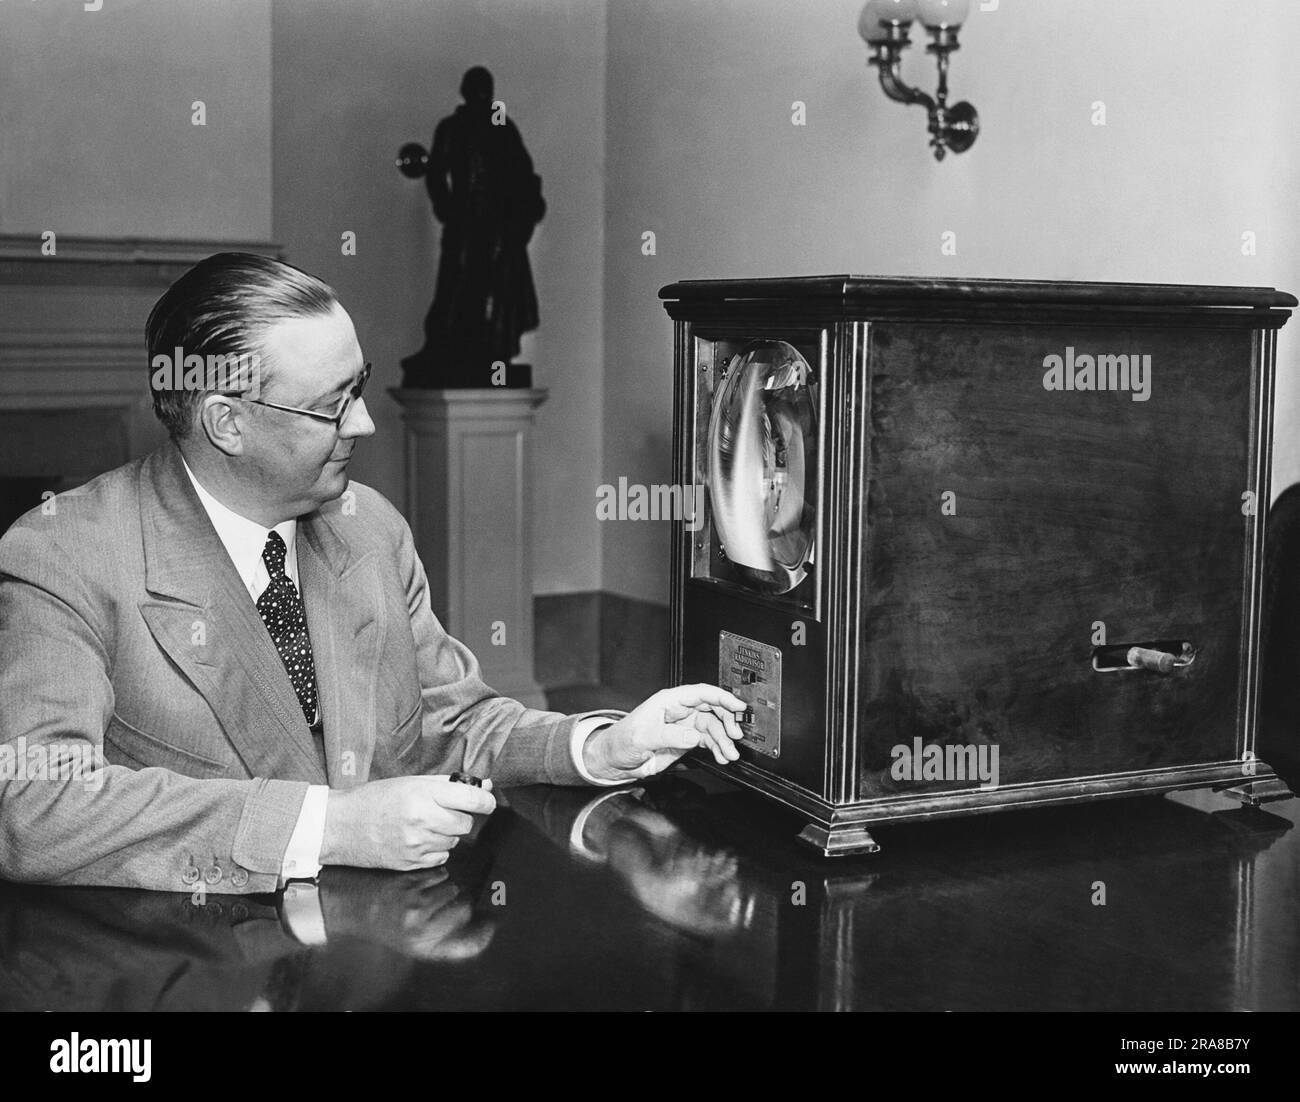 Washington, D.C.:  July 8, 1931 George Hastings, Secretary to President Herbert Hoover, examines a television receiver in his office at the White House. Stock Photo